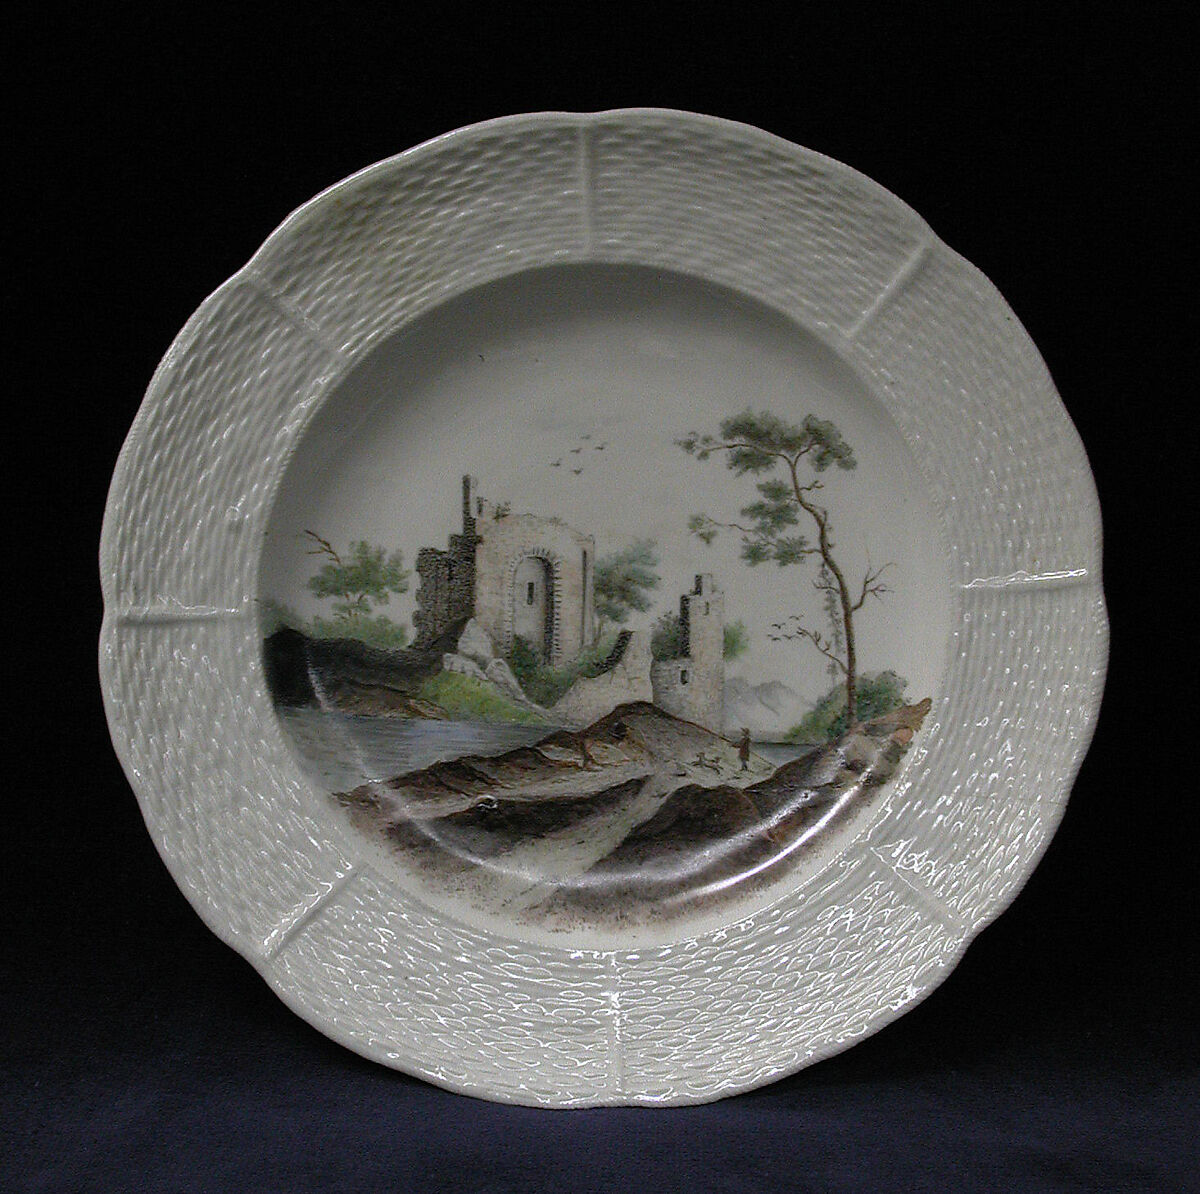 Plate, Zurich Pottery and Porcelain Factory (Swiss, founded 1763), Hard-paste porcelain, Swiss, Zurich 